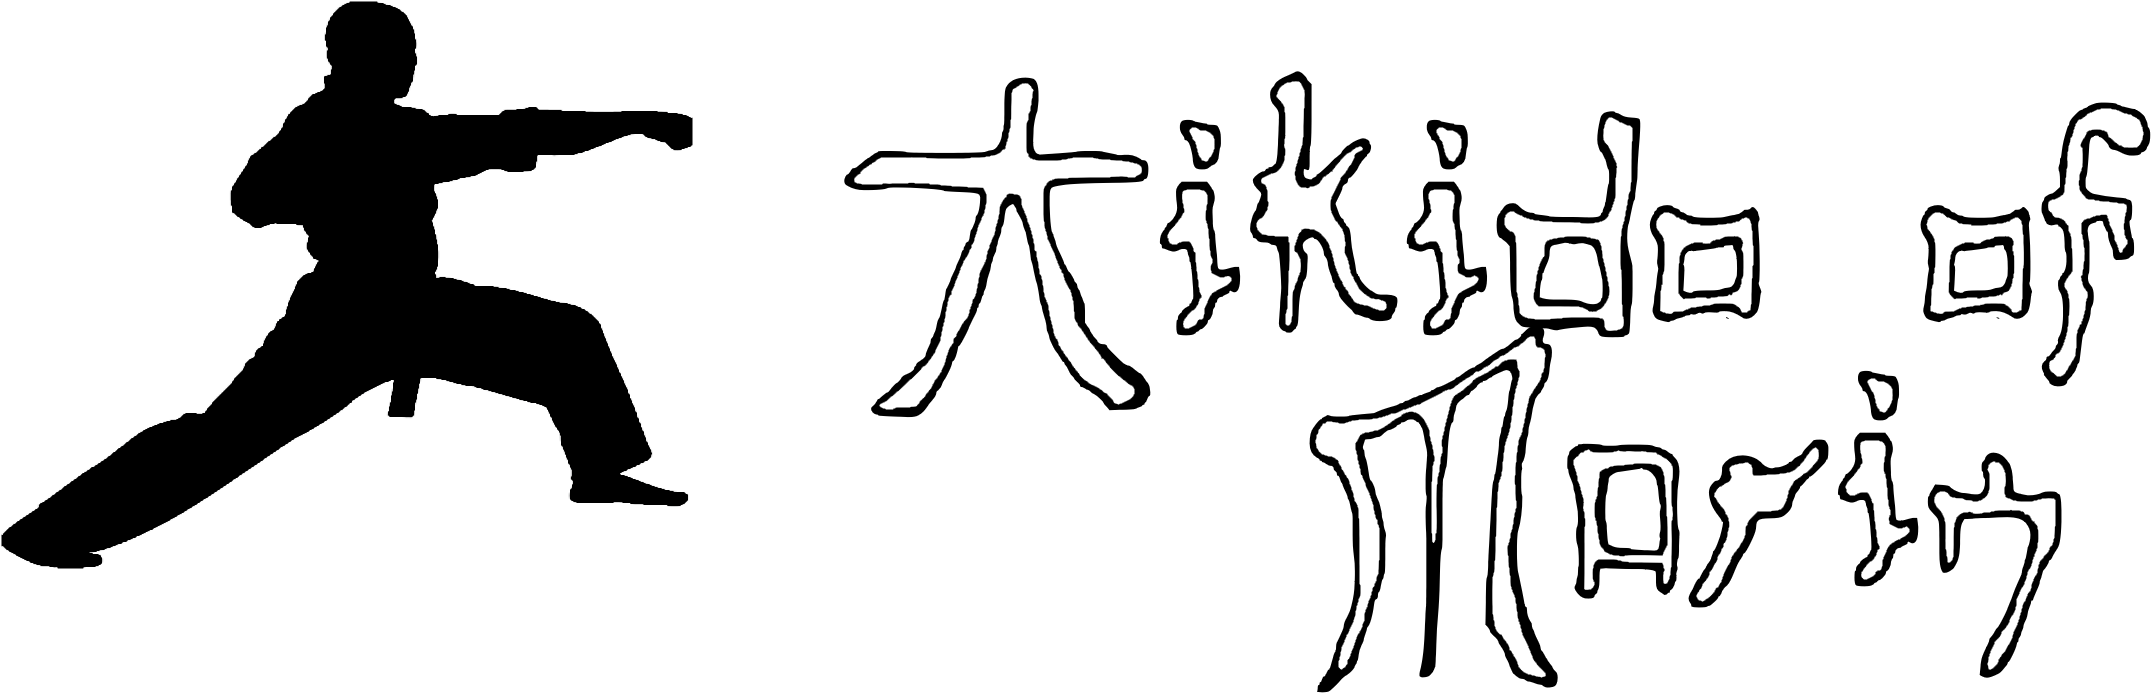 Aikido Martial Art Silhouette PNG